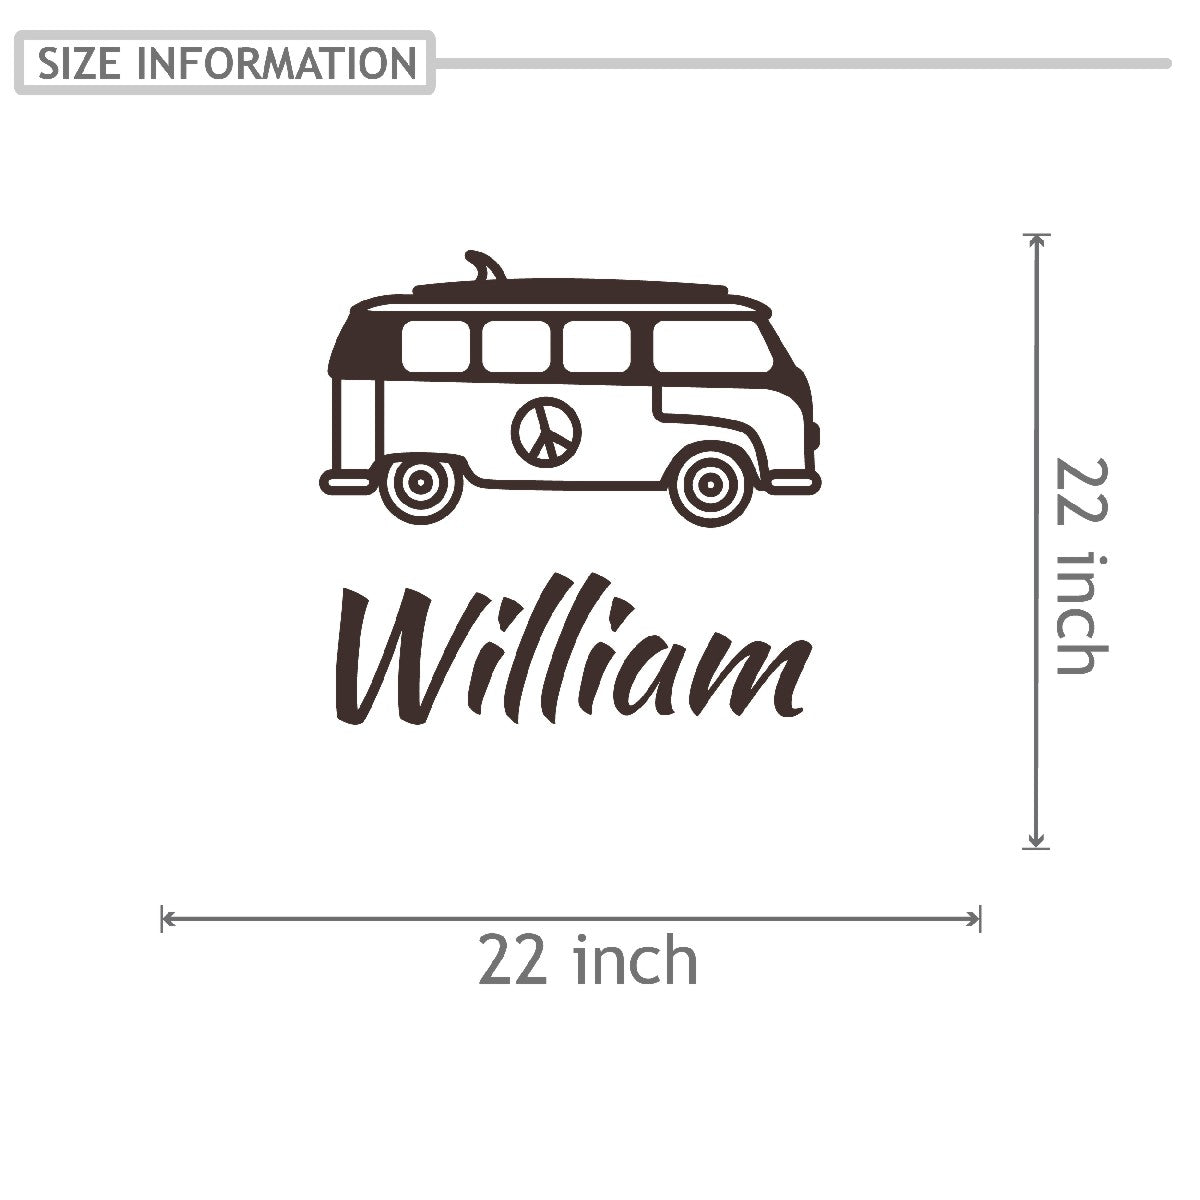 Personalized Name Stickers with Bus - Durable Custom Name Stickers for Furniture Laptops Doors - Easily-Applied Name Wall Decals for Kids Bedroom - Cool Name Decal